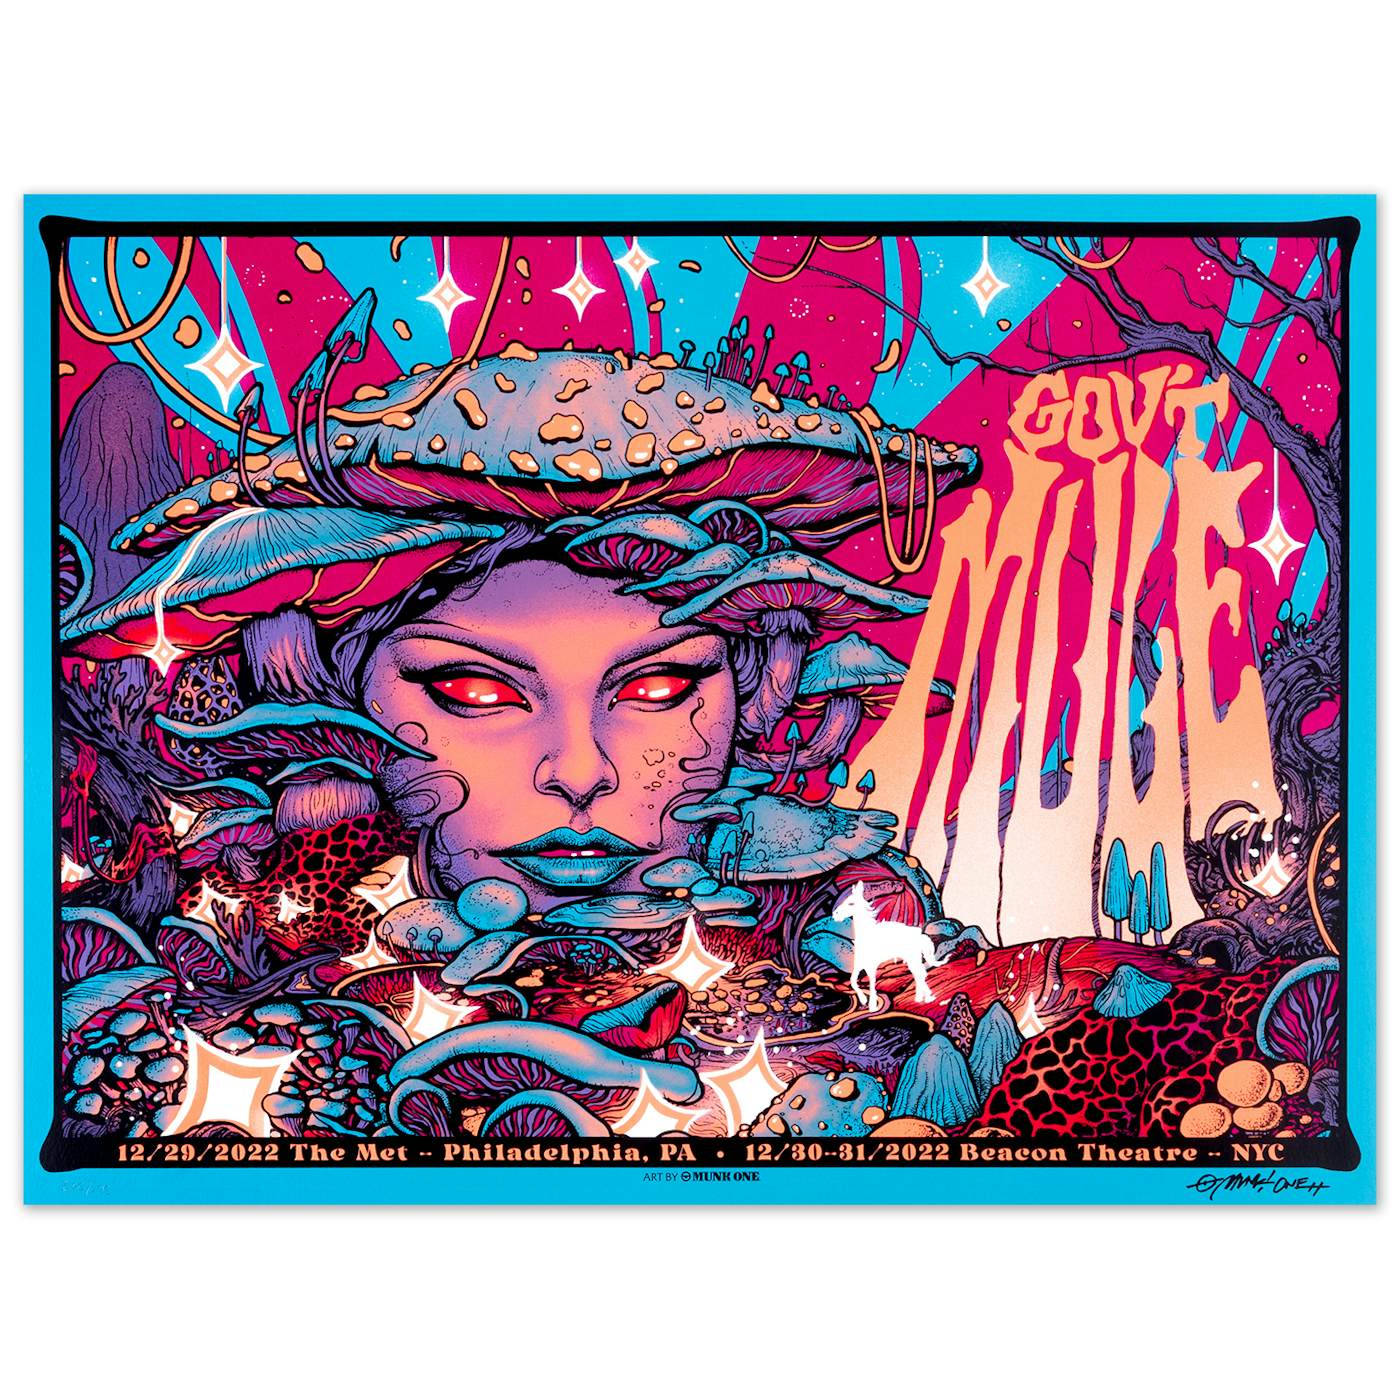 Gov't Mule NEW YEAR’S RUN 2022-2023 POSTER - MUNK ONE (UNSIGNED)